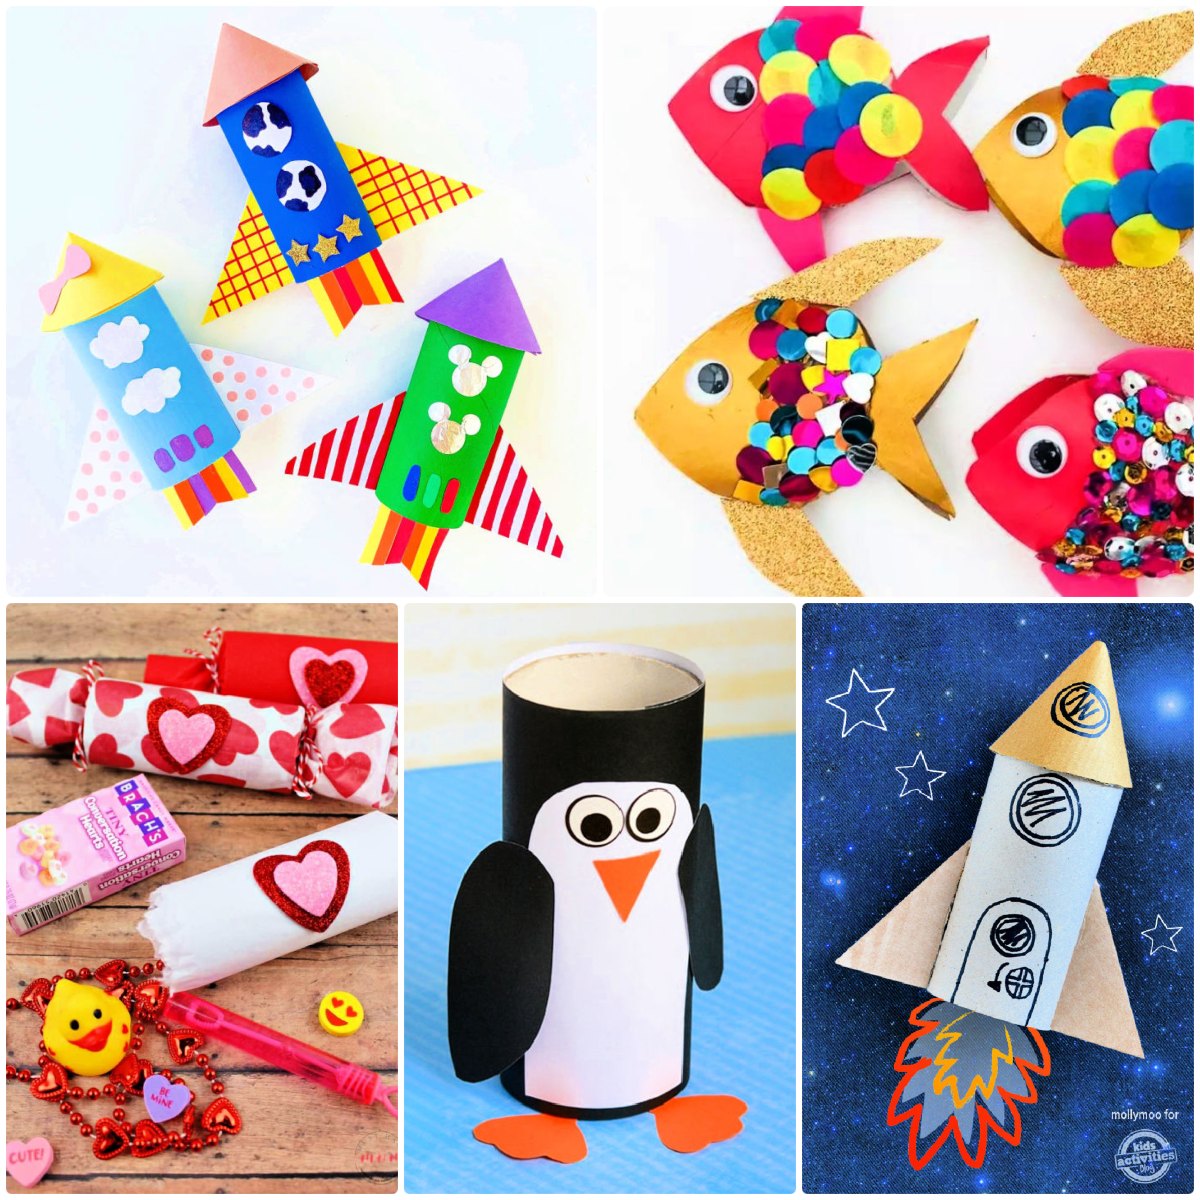 35 Easy Toilet Paper Roll Crafts for Kids - Craftulate